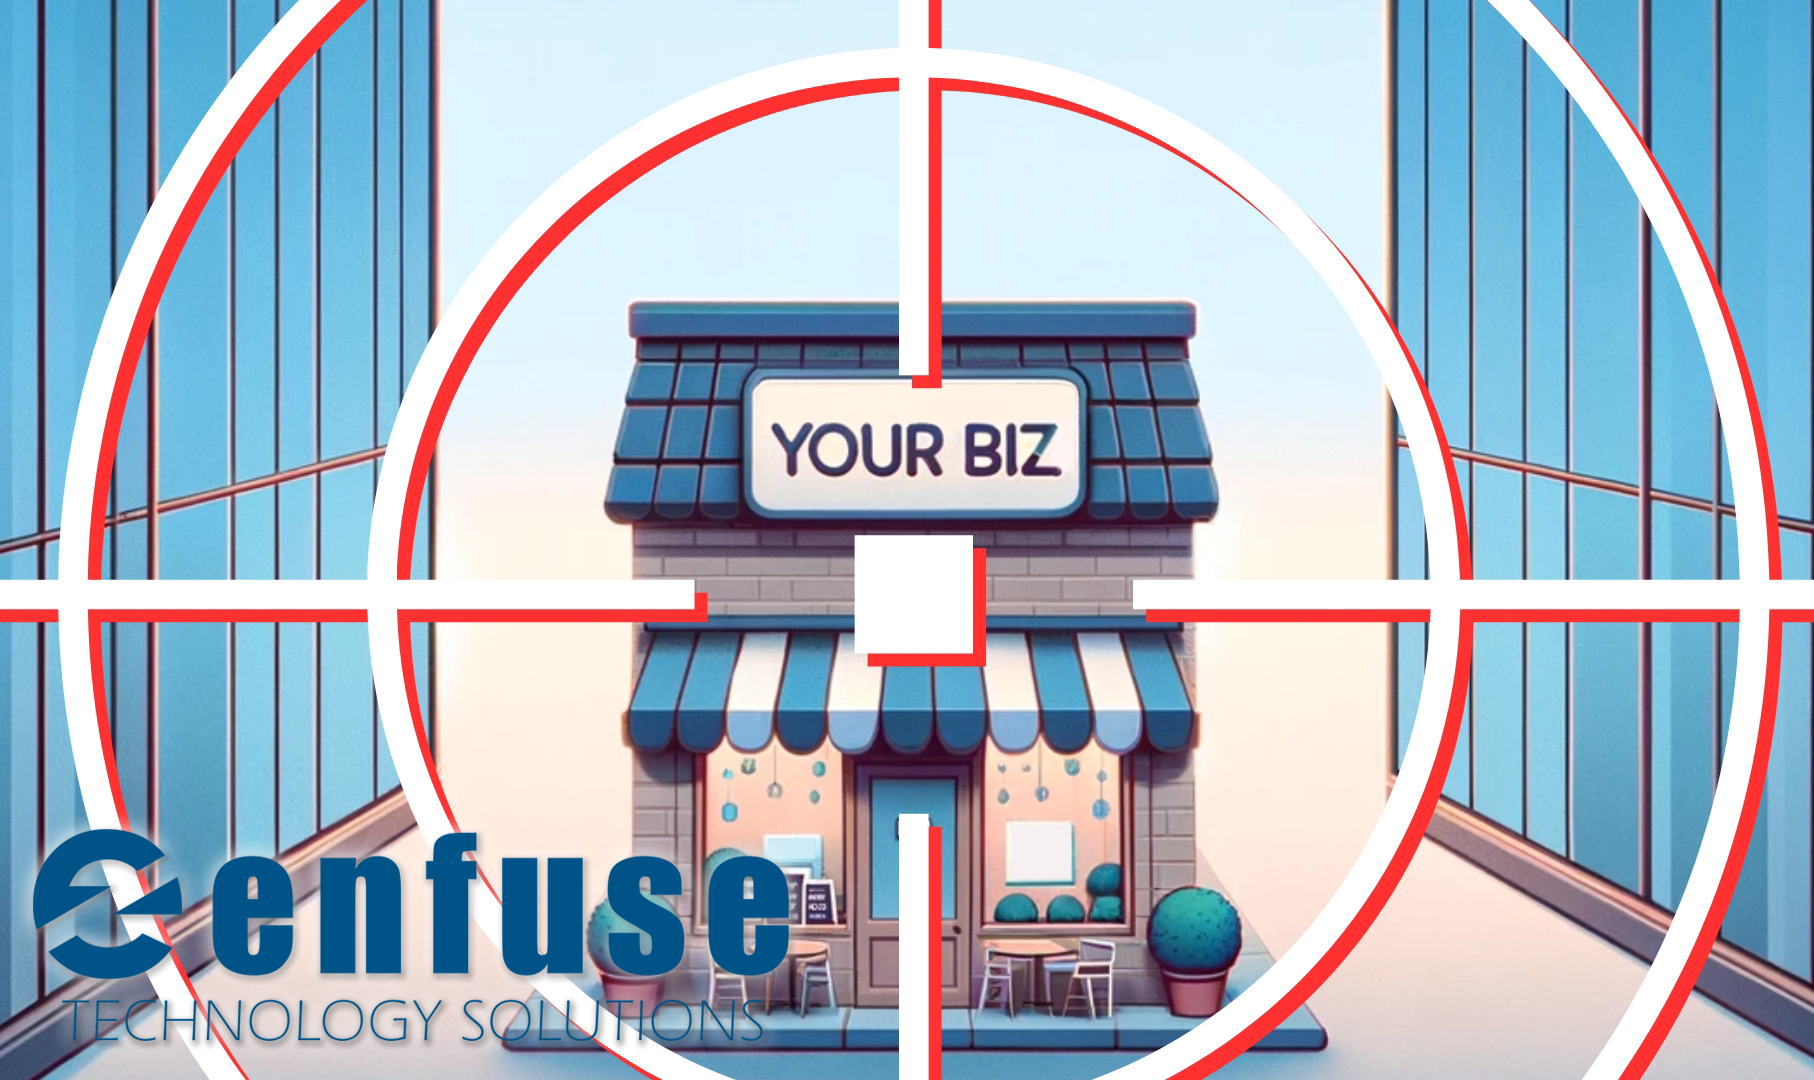 Don't think your business is a target - Think again